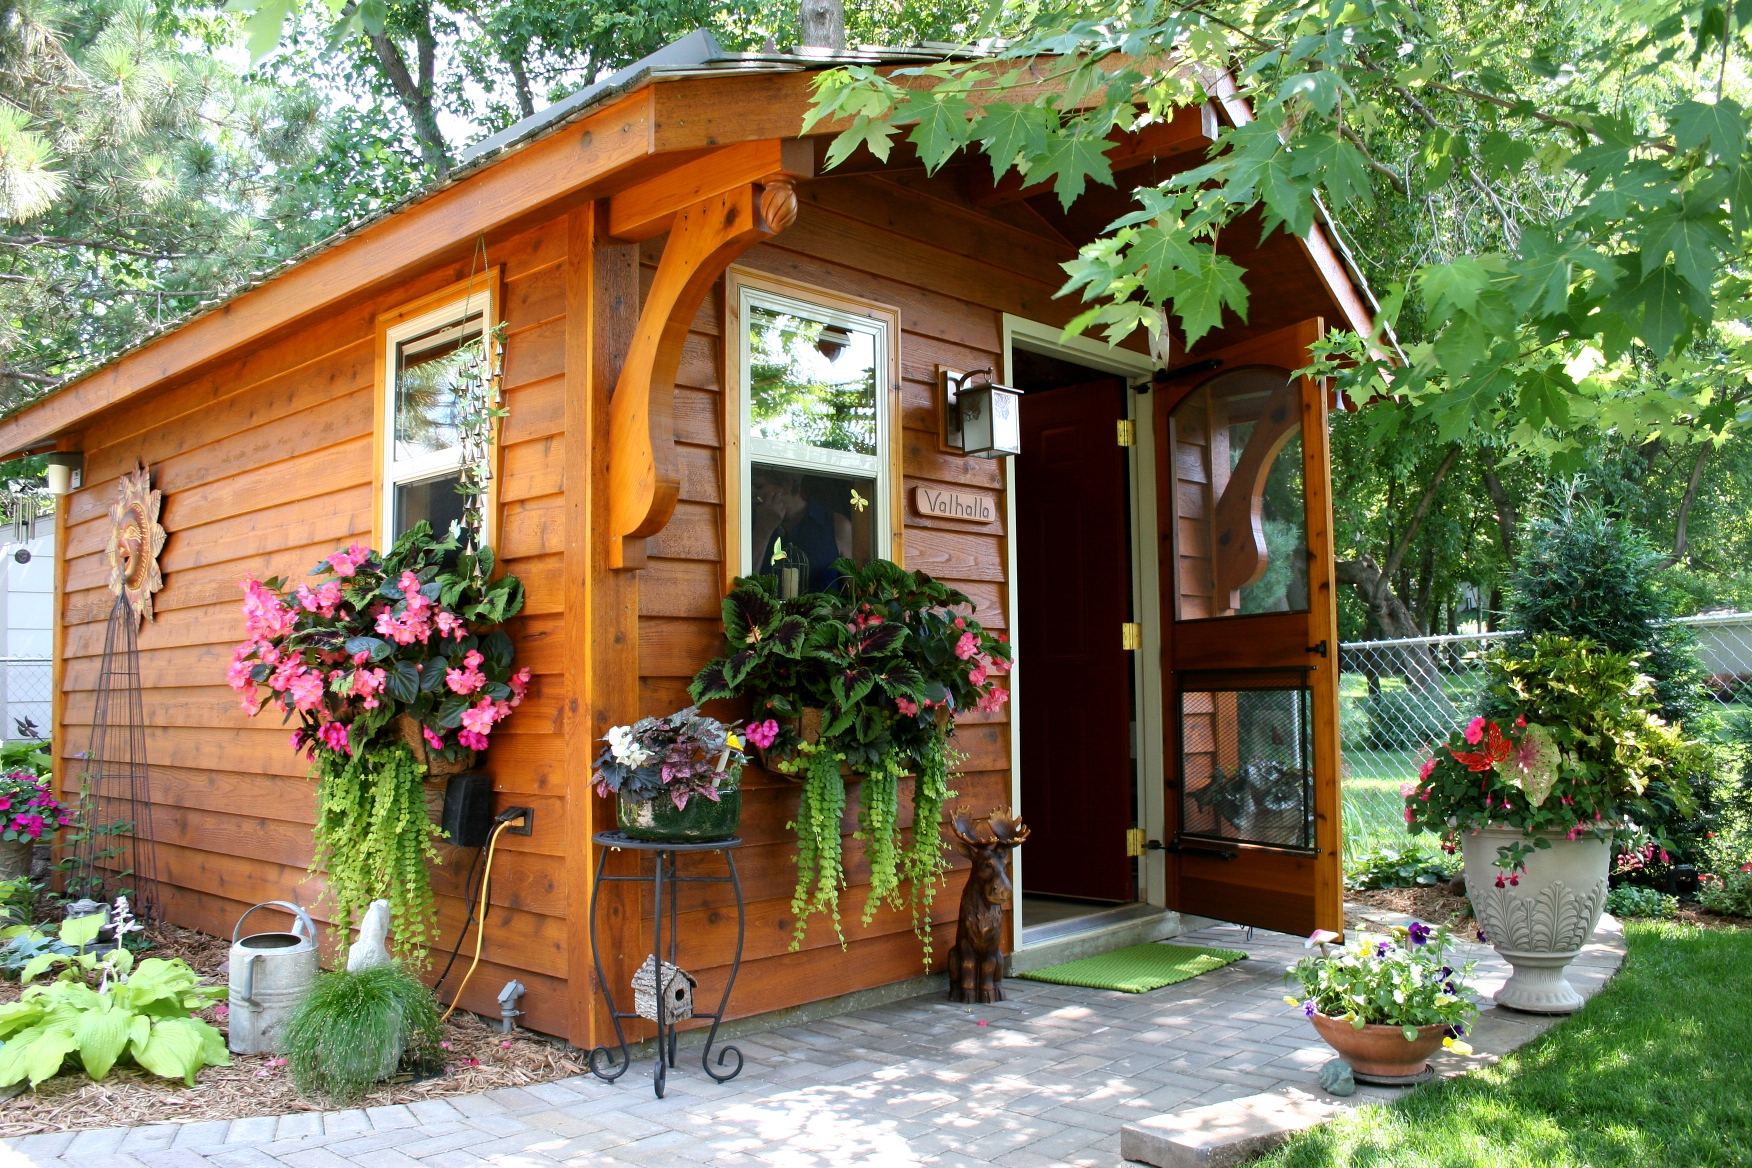 Charming rustic wooden garden shed